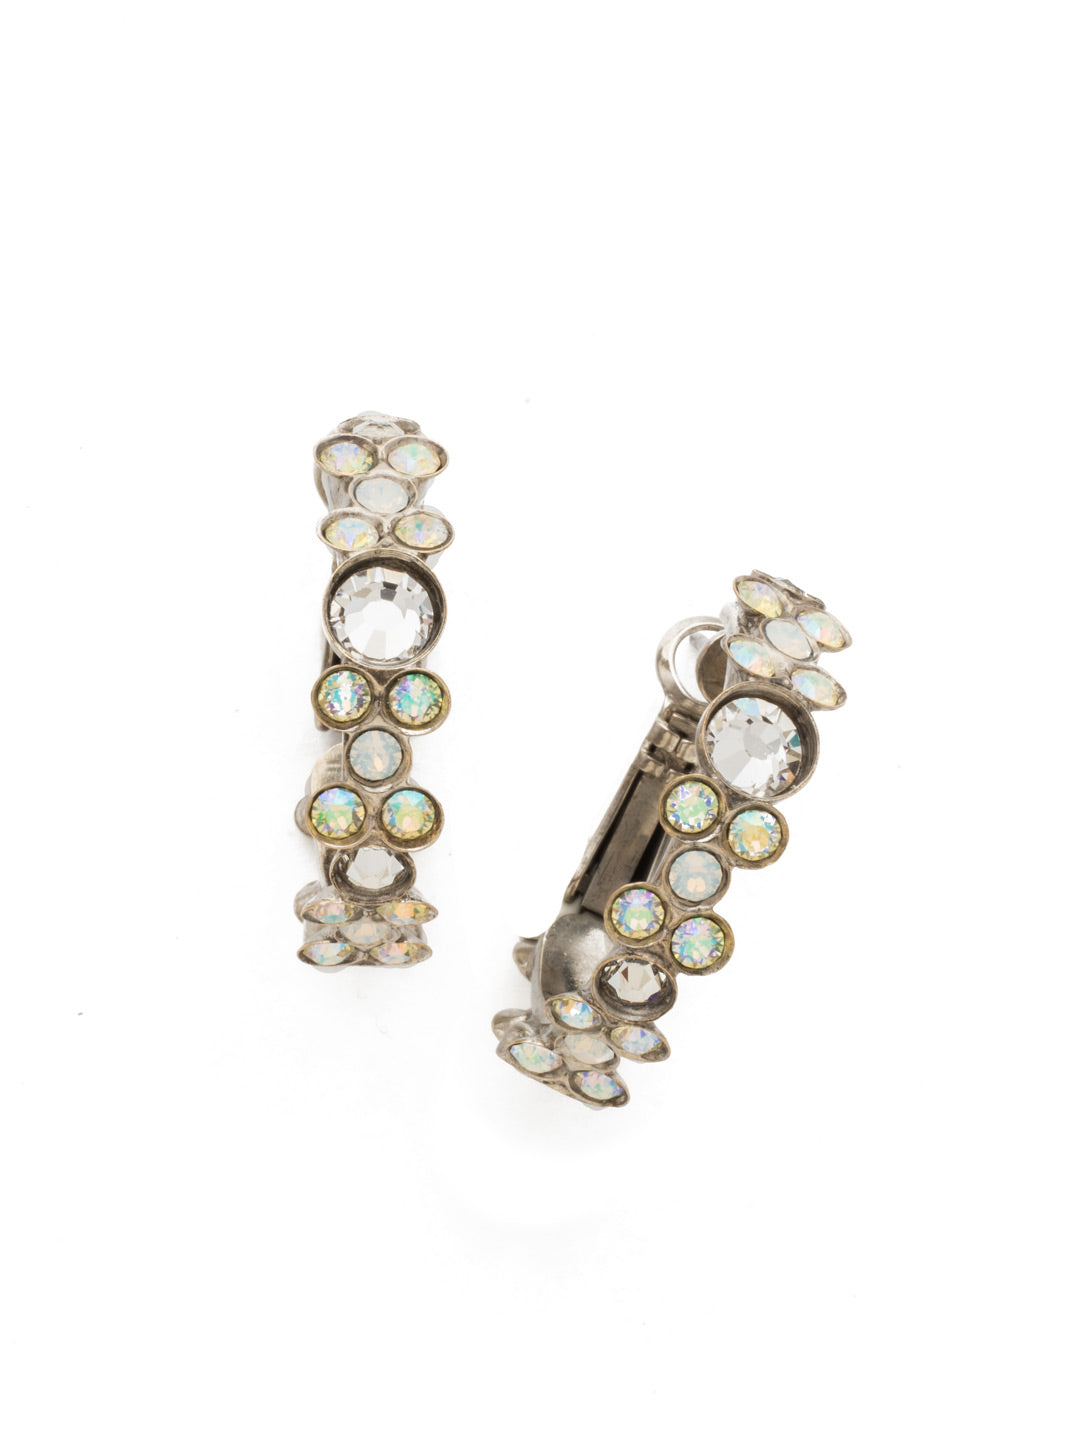 Floral Hoop Earrings - EBP15ASLZ - <p>Intricate design, infused with gorgeous shine. A motif of floral clusters is featured here on a small, delicate hoop with a hinged post backing. From Sorrelli's Lemon Zest collection in our Antique Silver-tone finish.</p>